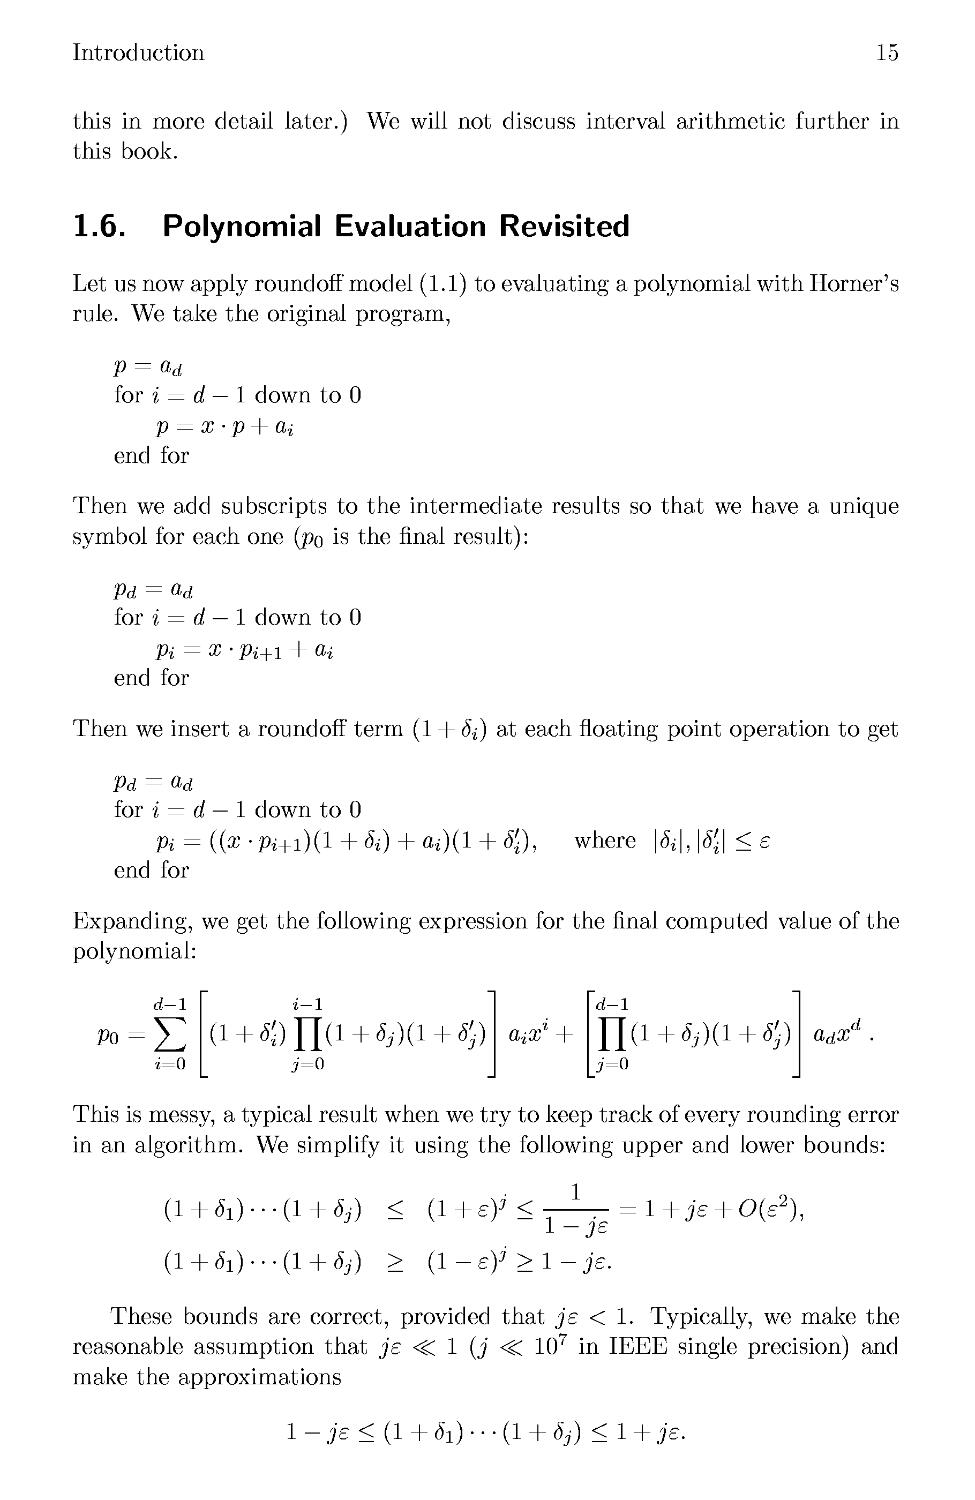 1.6 Polynomial Evaluation Revisited